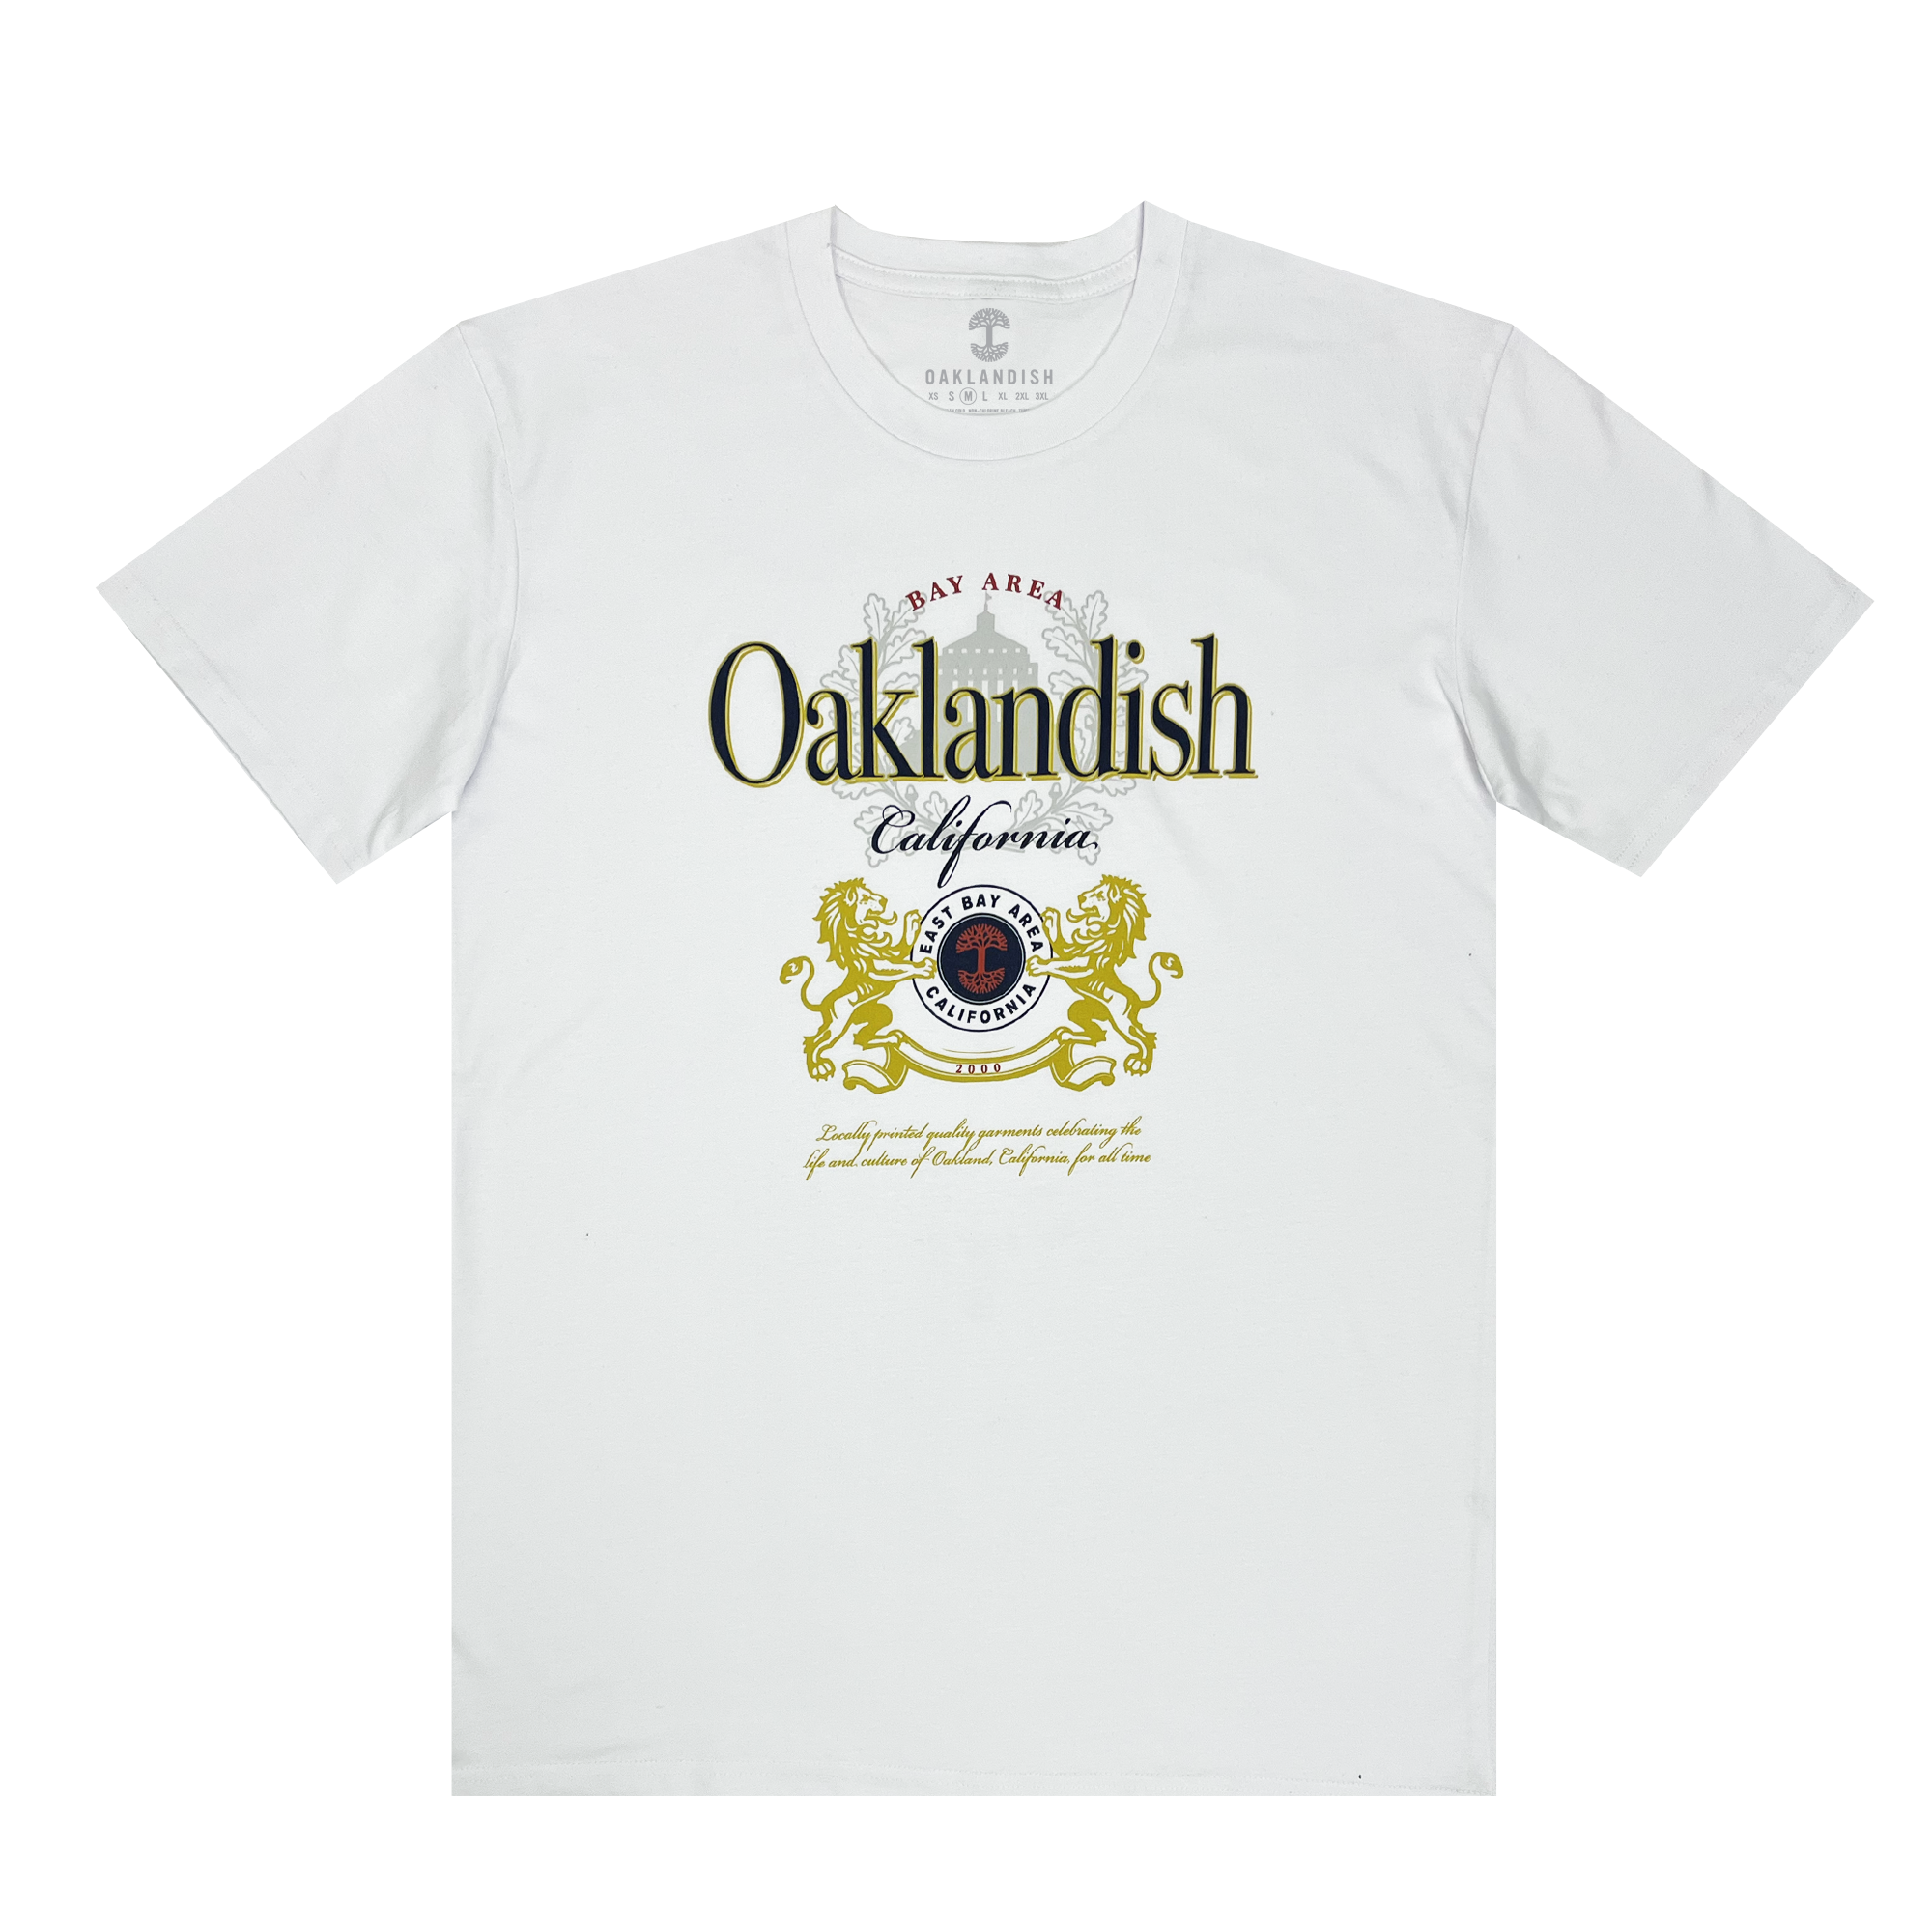 Front view of white t-shirt with Lager Especial logo made over with Bay Area, Oaklandish, California stylings.